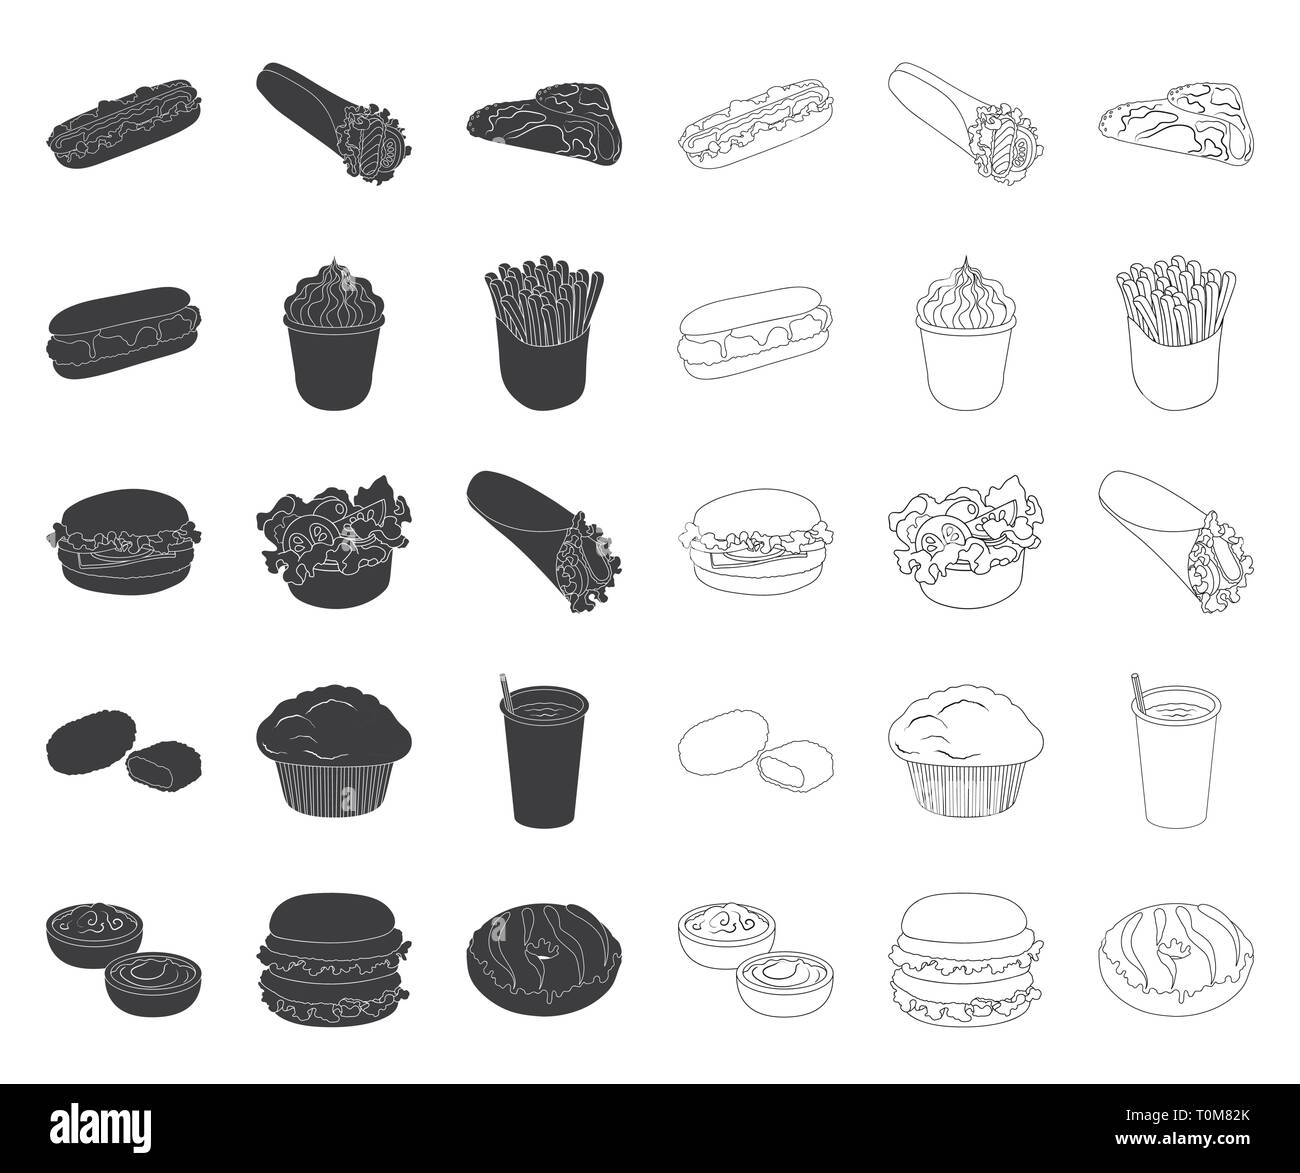 black,outline,breakfast,burger,cafe,cake,chicken,coffee,collection,convenience,cooking,cream,design,dish,donut,fast,food,french,fries,ginger,ham,hamburger,hotdog,icon,illustration,ingredient,isolated,lavash,lettuce,logo,lunch,mustard,nuggets,pancake,product,restaurant,roll,sausage,seasoning,semifinished,service,set,shawarma,sign,symbol,tomato,vector,web Vector Vectors , Stock Vector